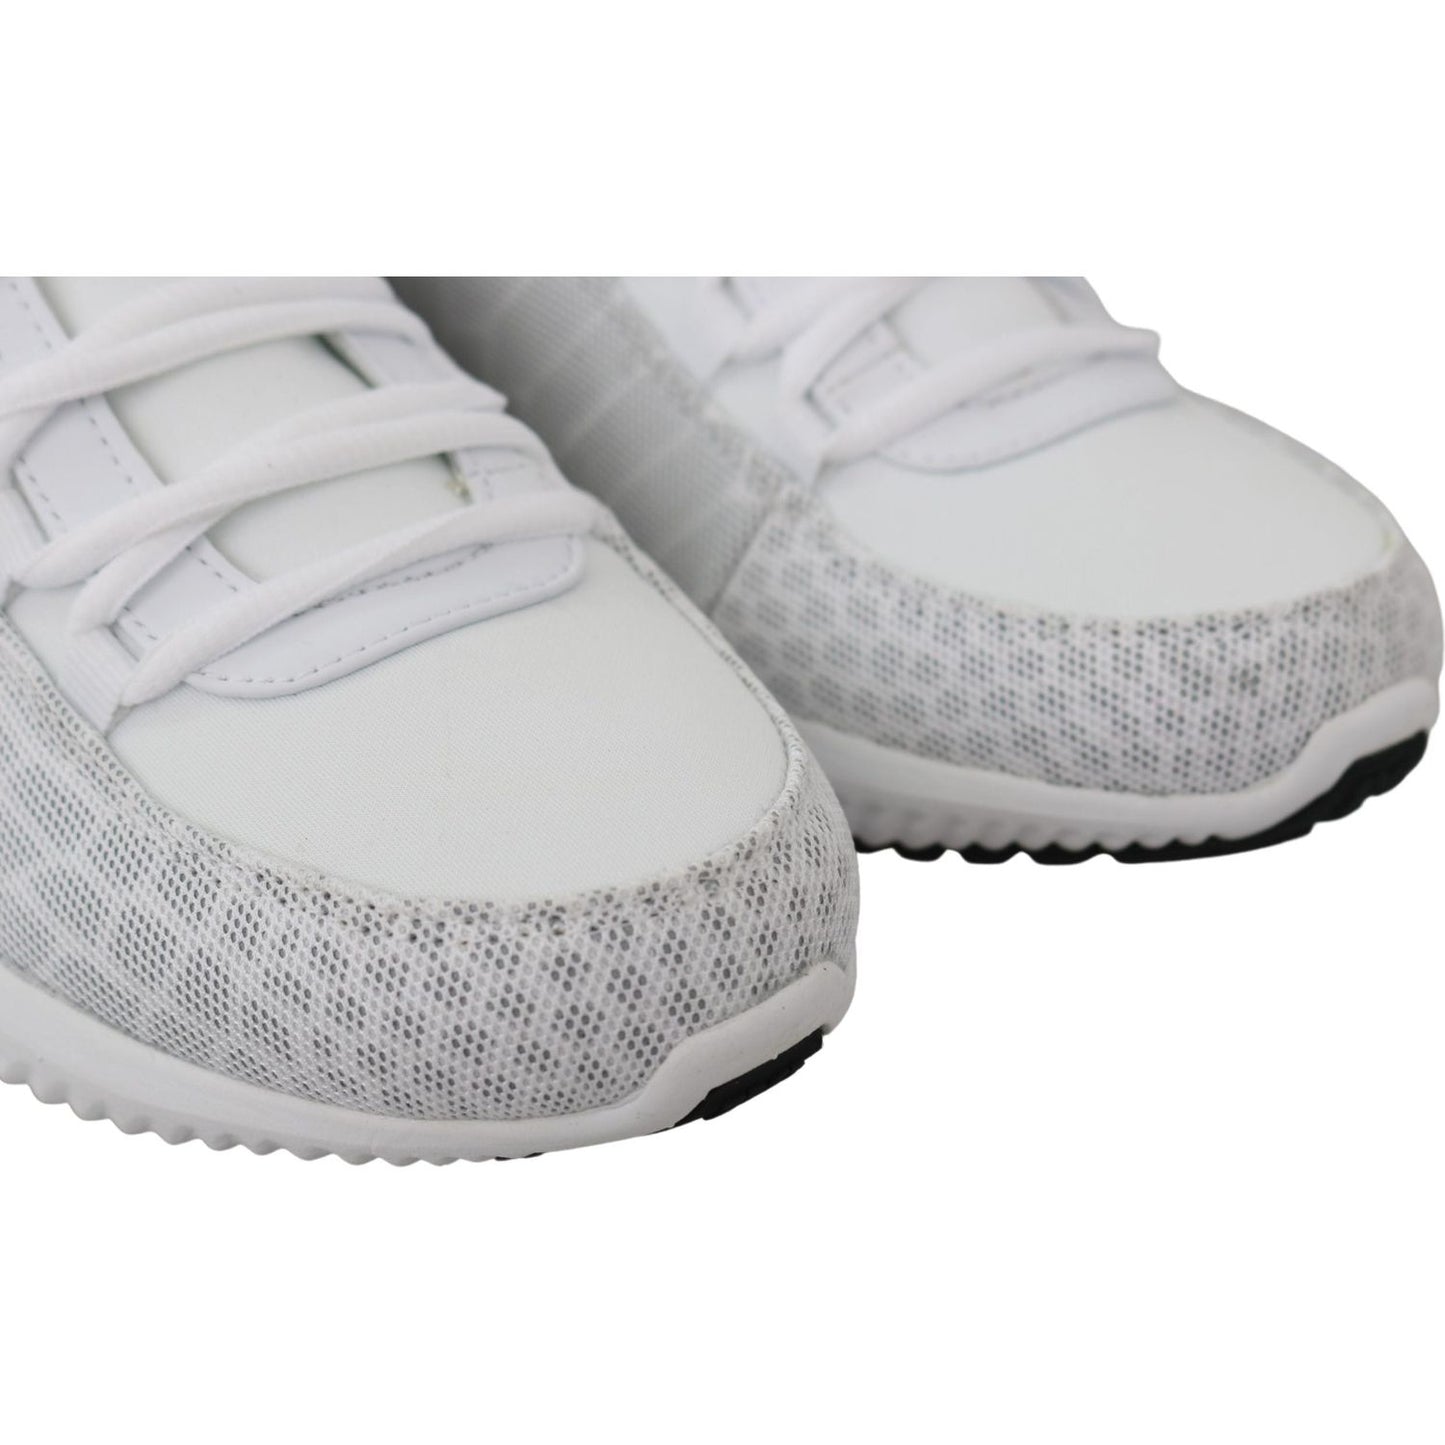 Plein Sport Exquisite Plein Sport Sneakers for Men white-polyester-adrian-sneakers-shoes